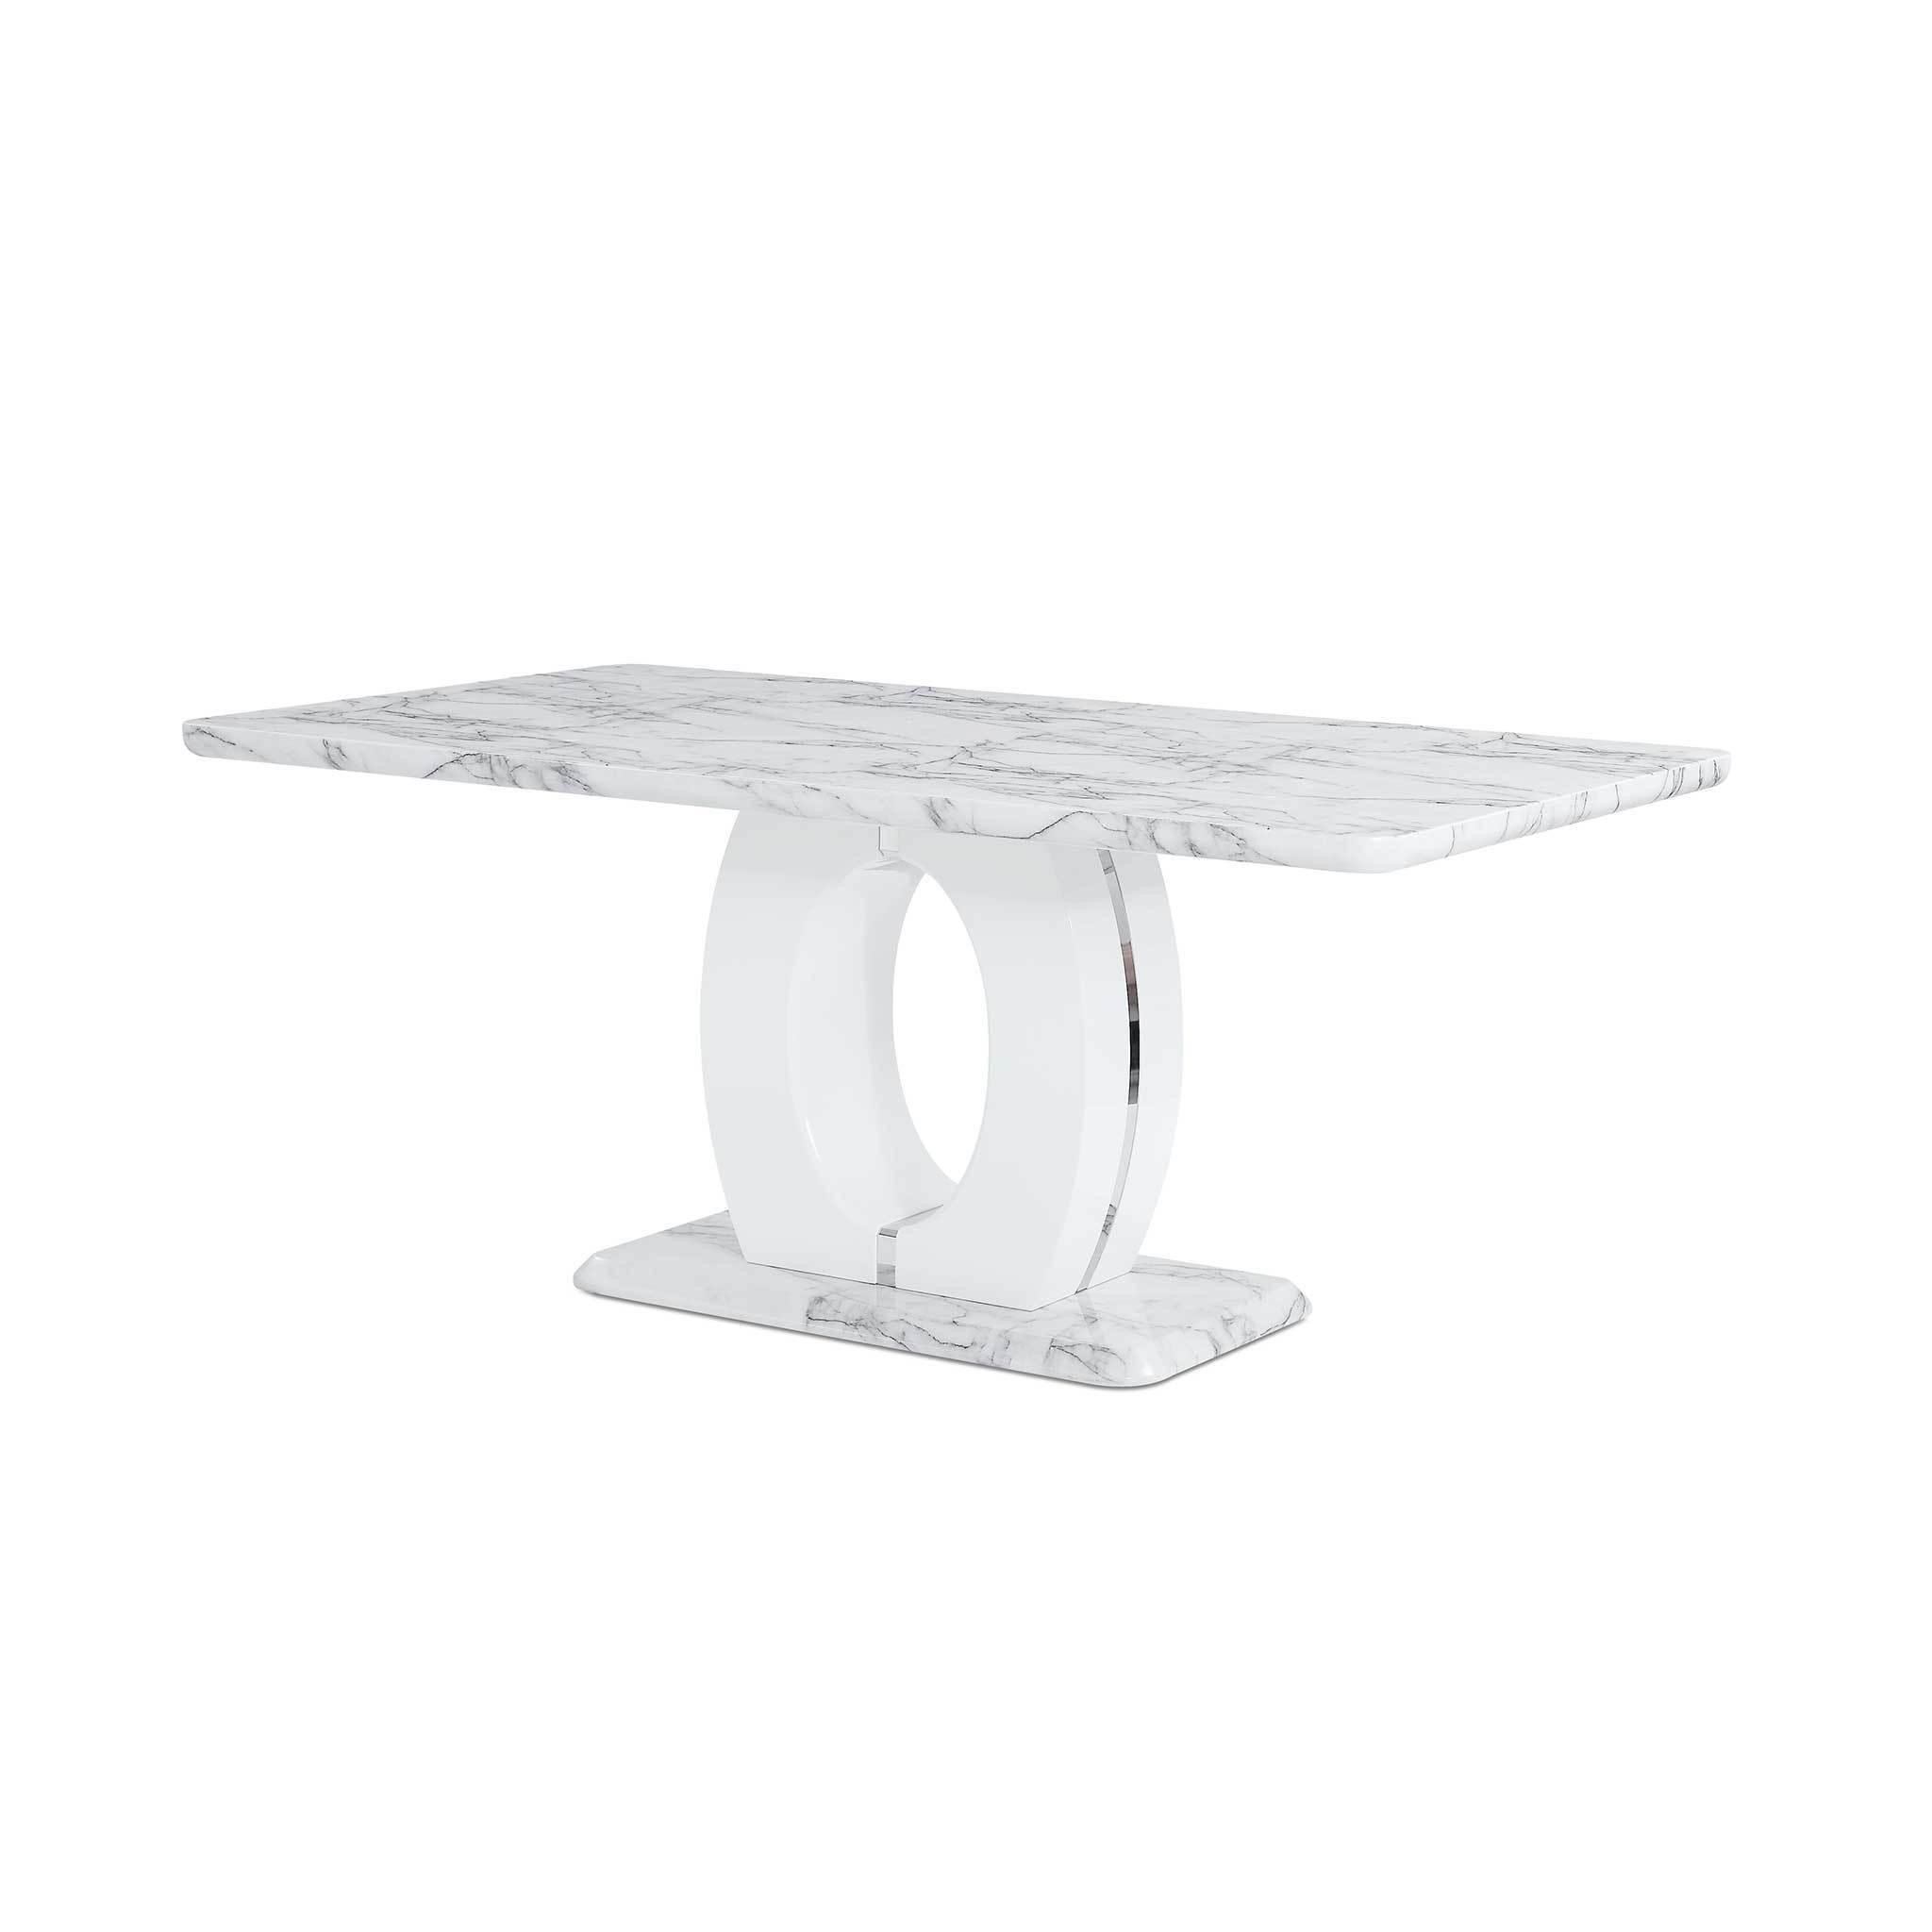 Contemporary Dining Table D894DT D894DT in White, Silver 